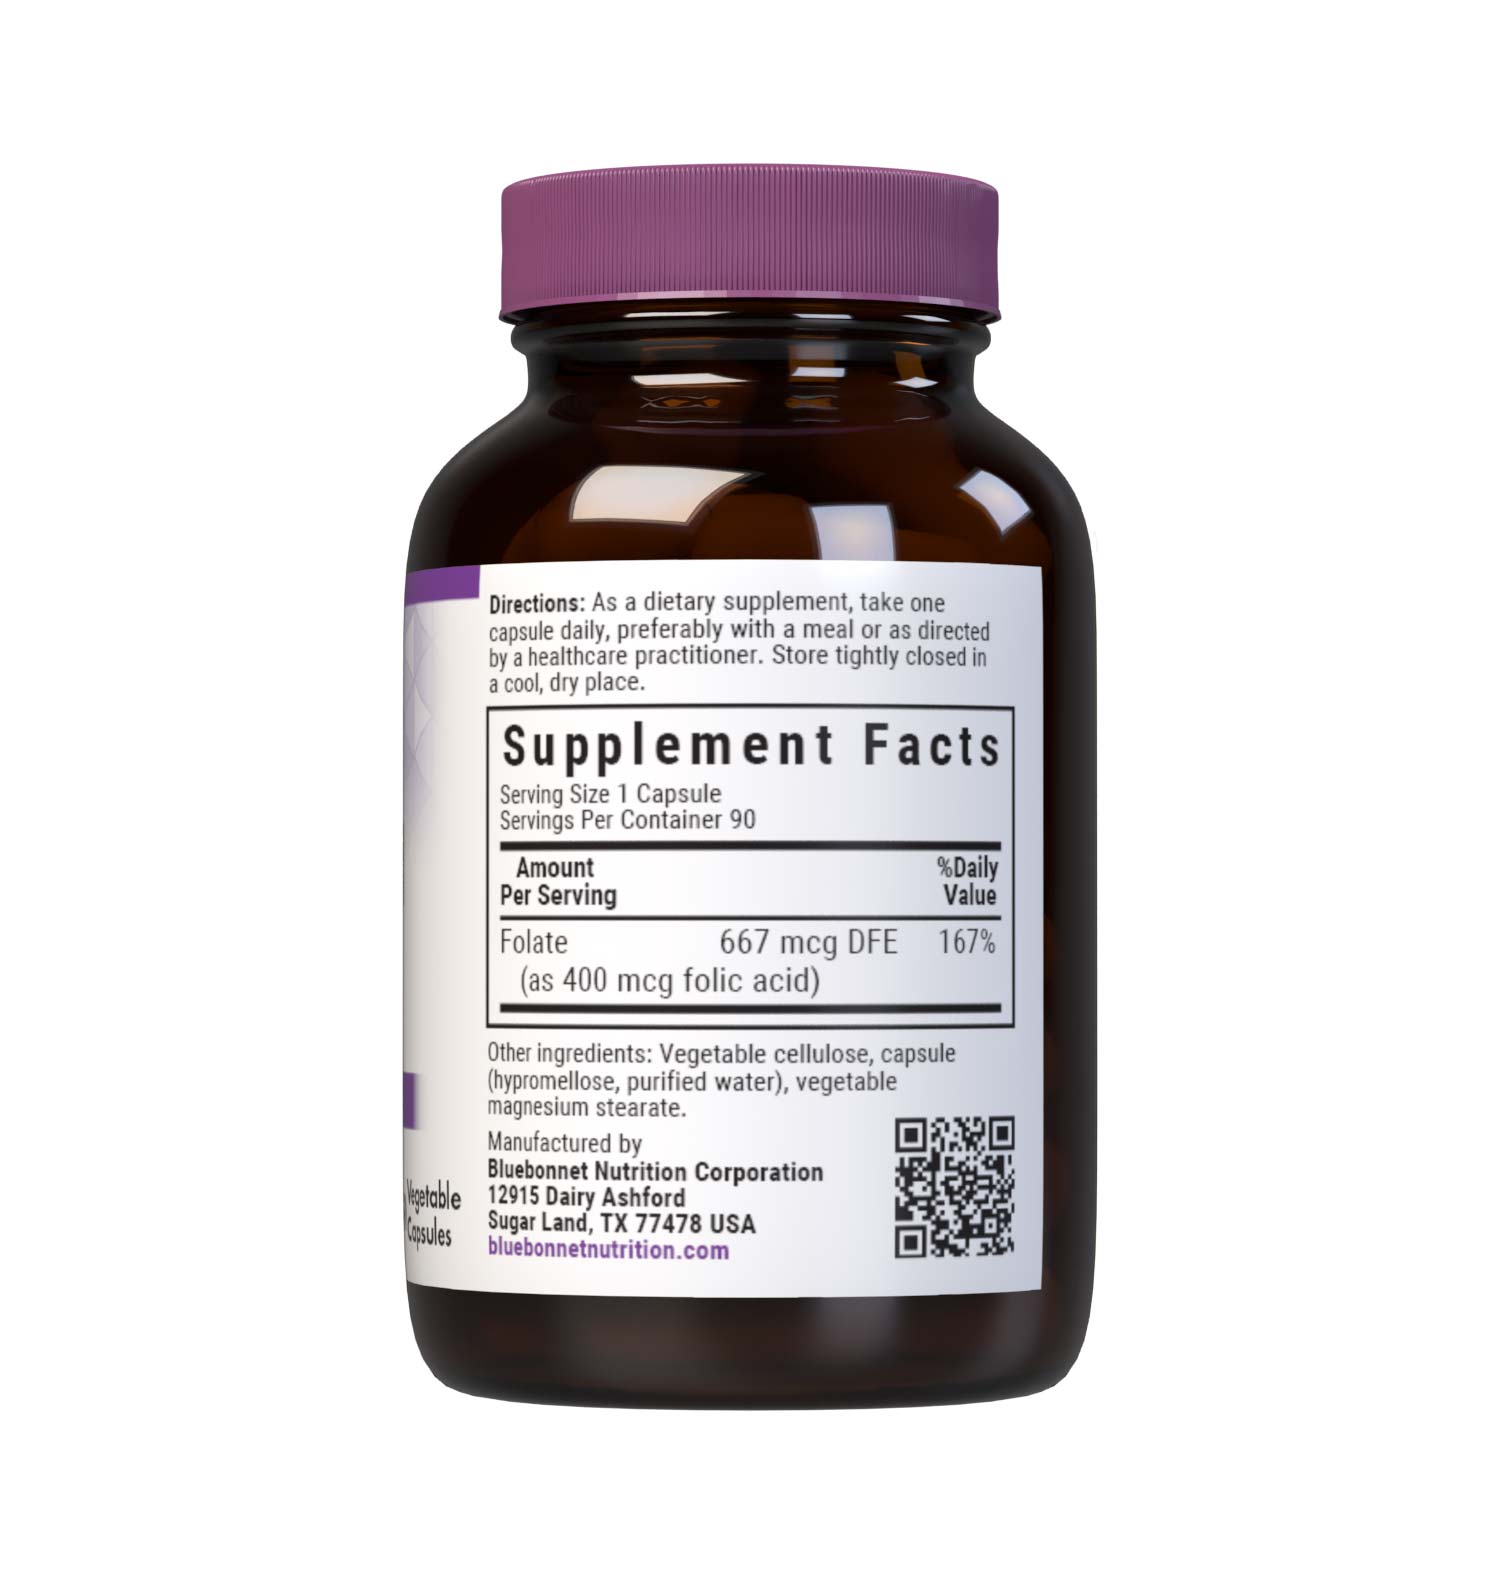 Bluebonnet’s Folic Acid 400 mcg Vegetable Capsules are formulated with folate in its crystalline form which may help support neural tube development. Supplement facts panel. #size_90 count